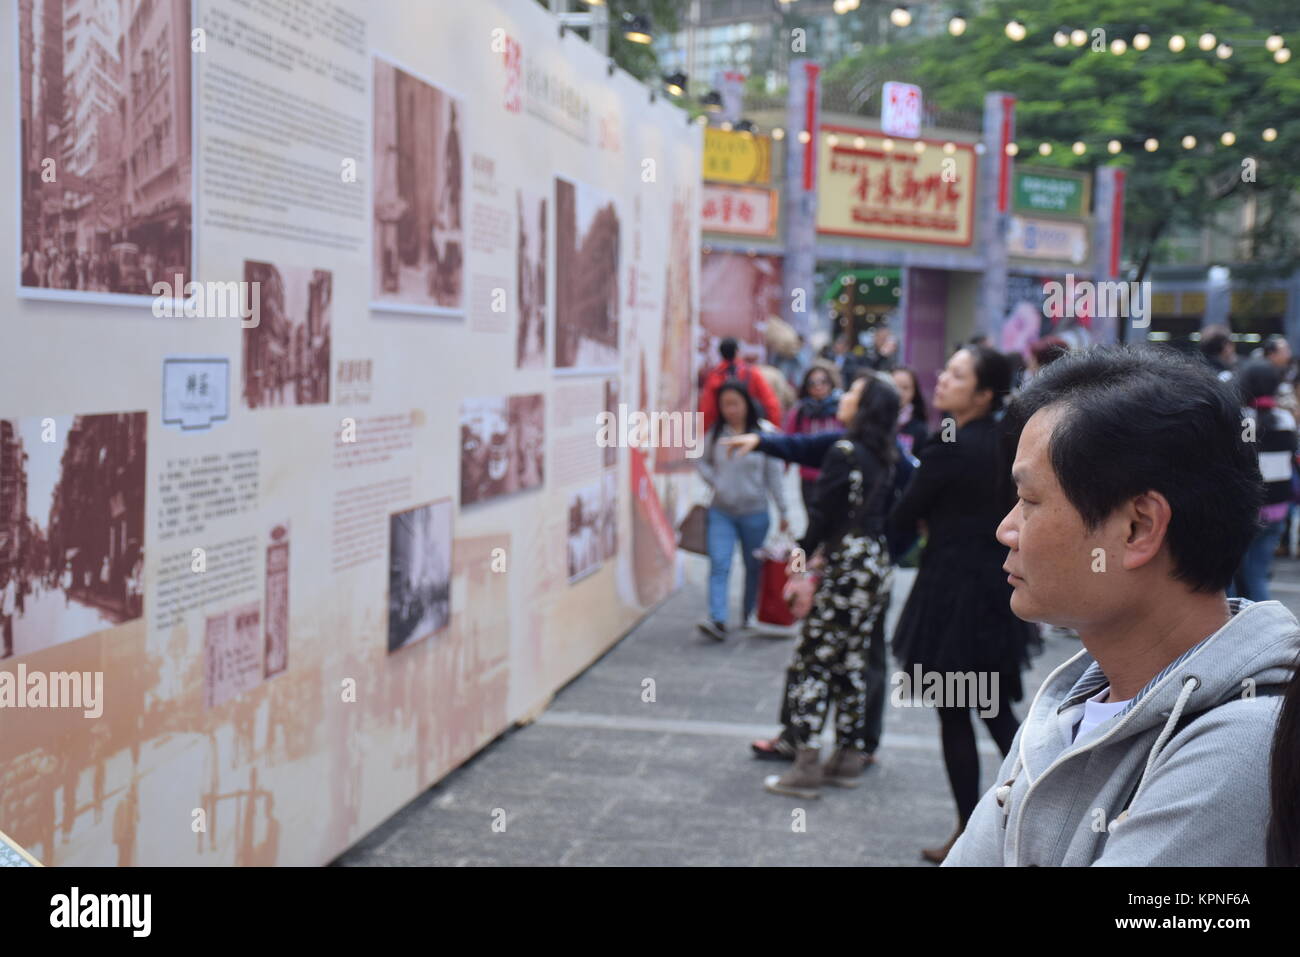 Chinese man reads a panel with information about Chaozhou history in Chiu Chow market in Hong Kong Stock Photo